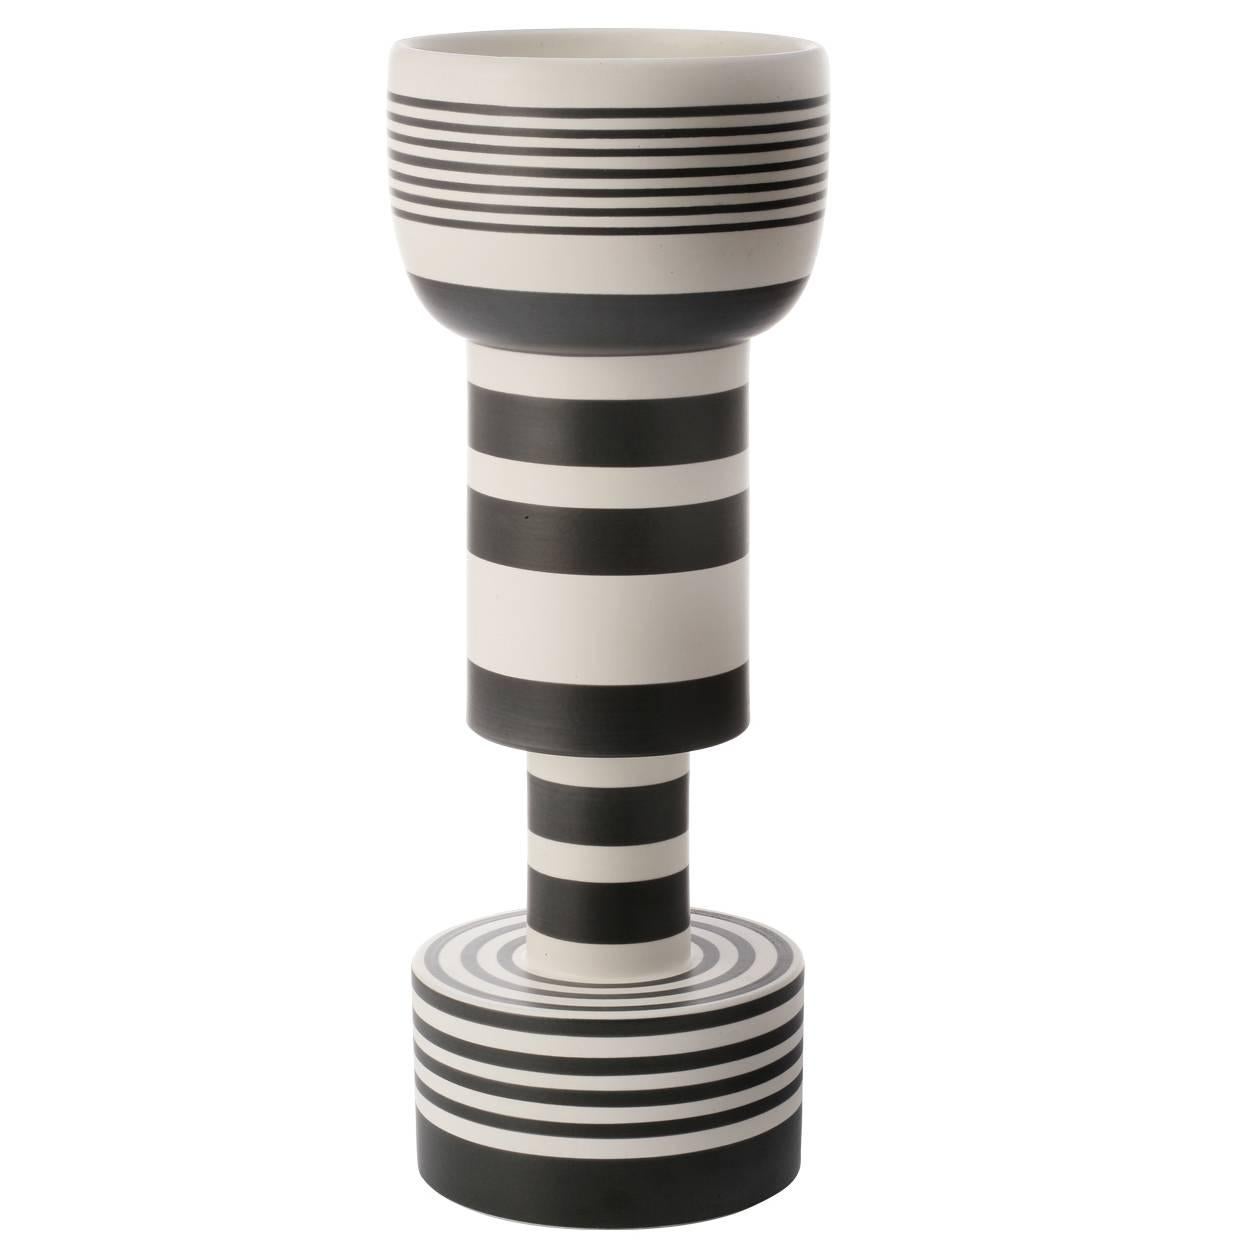 Chalice Vase by Ettore Sottsass